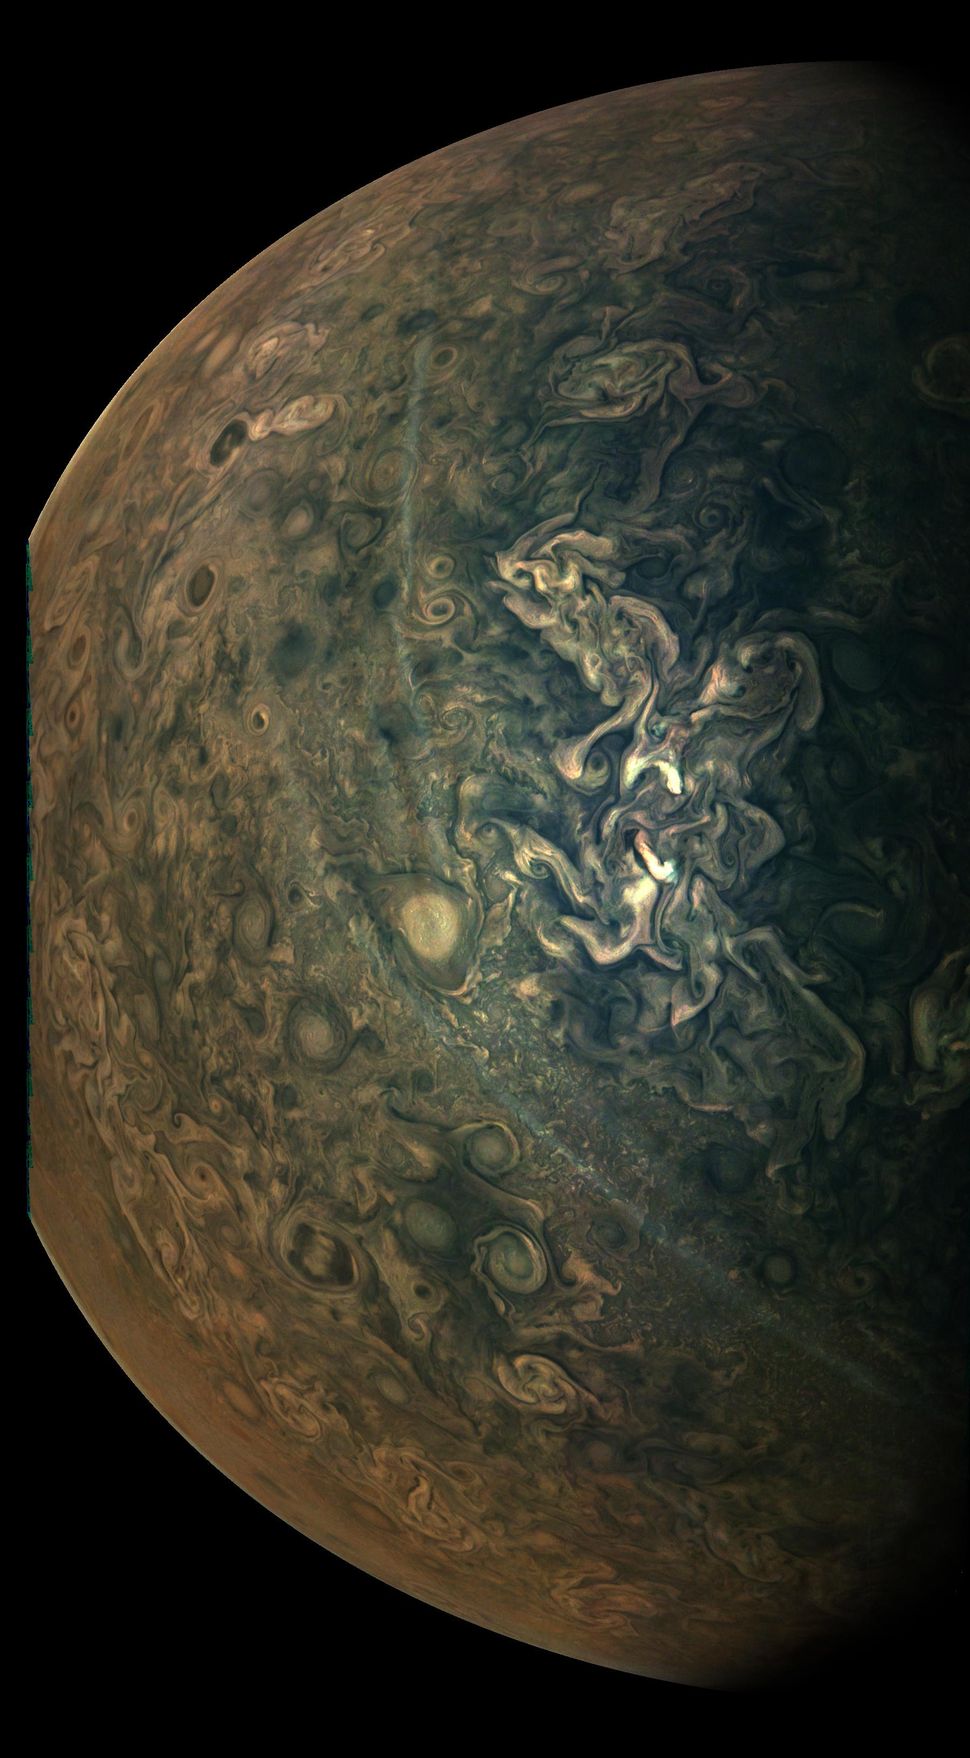 Get lost in Jupiter's haze thanks to new pictures from NASA spacecraft